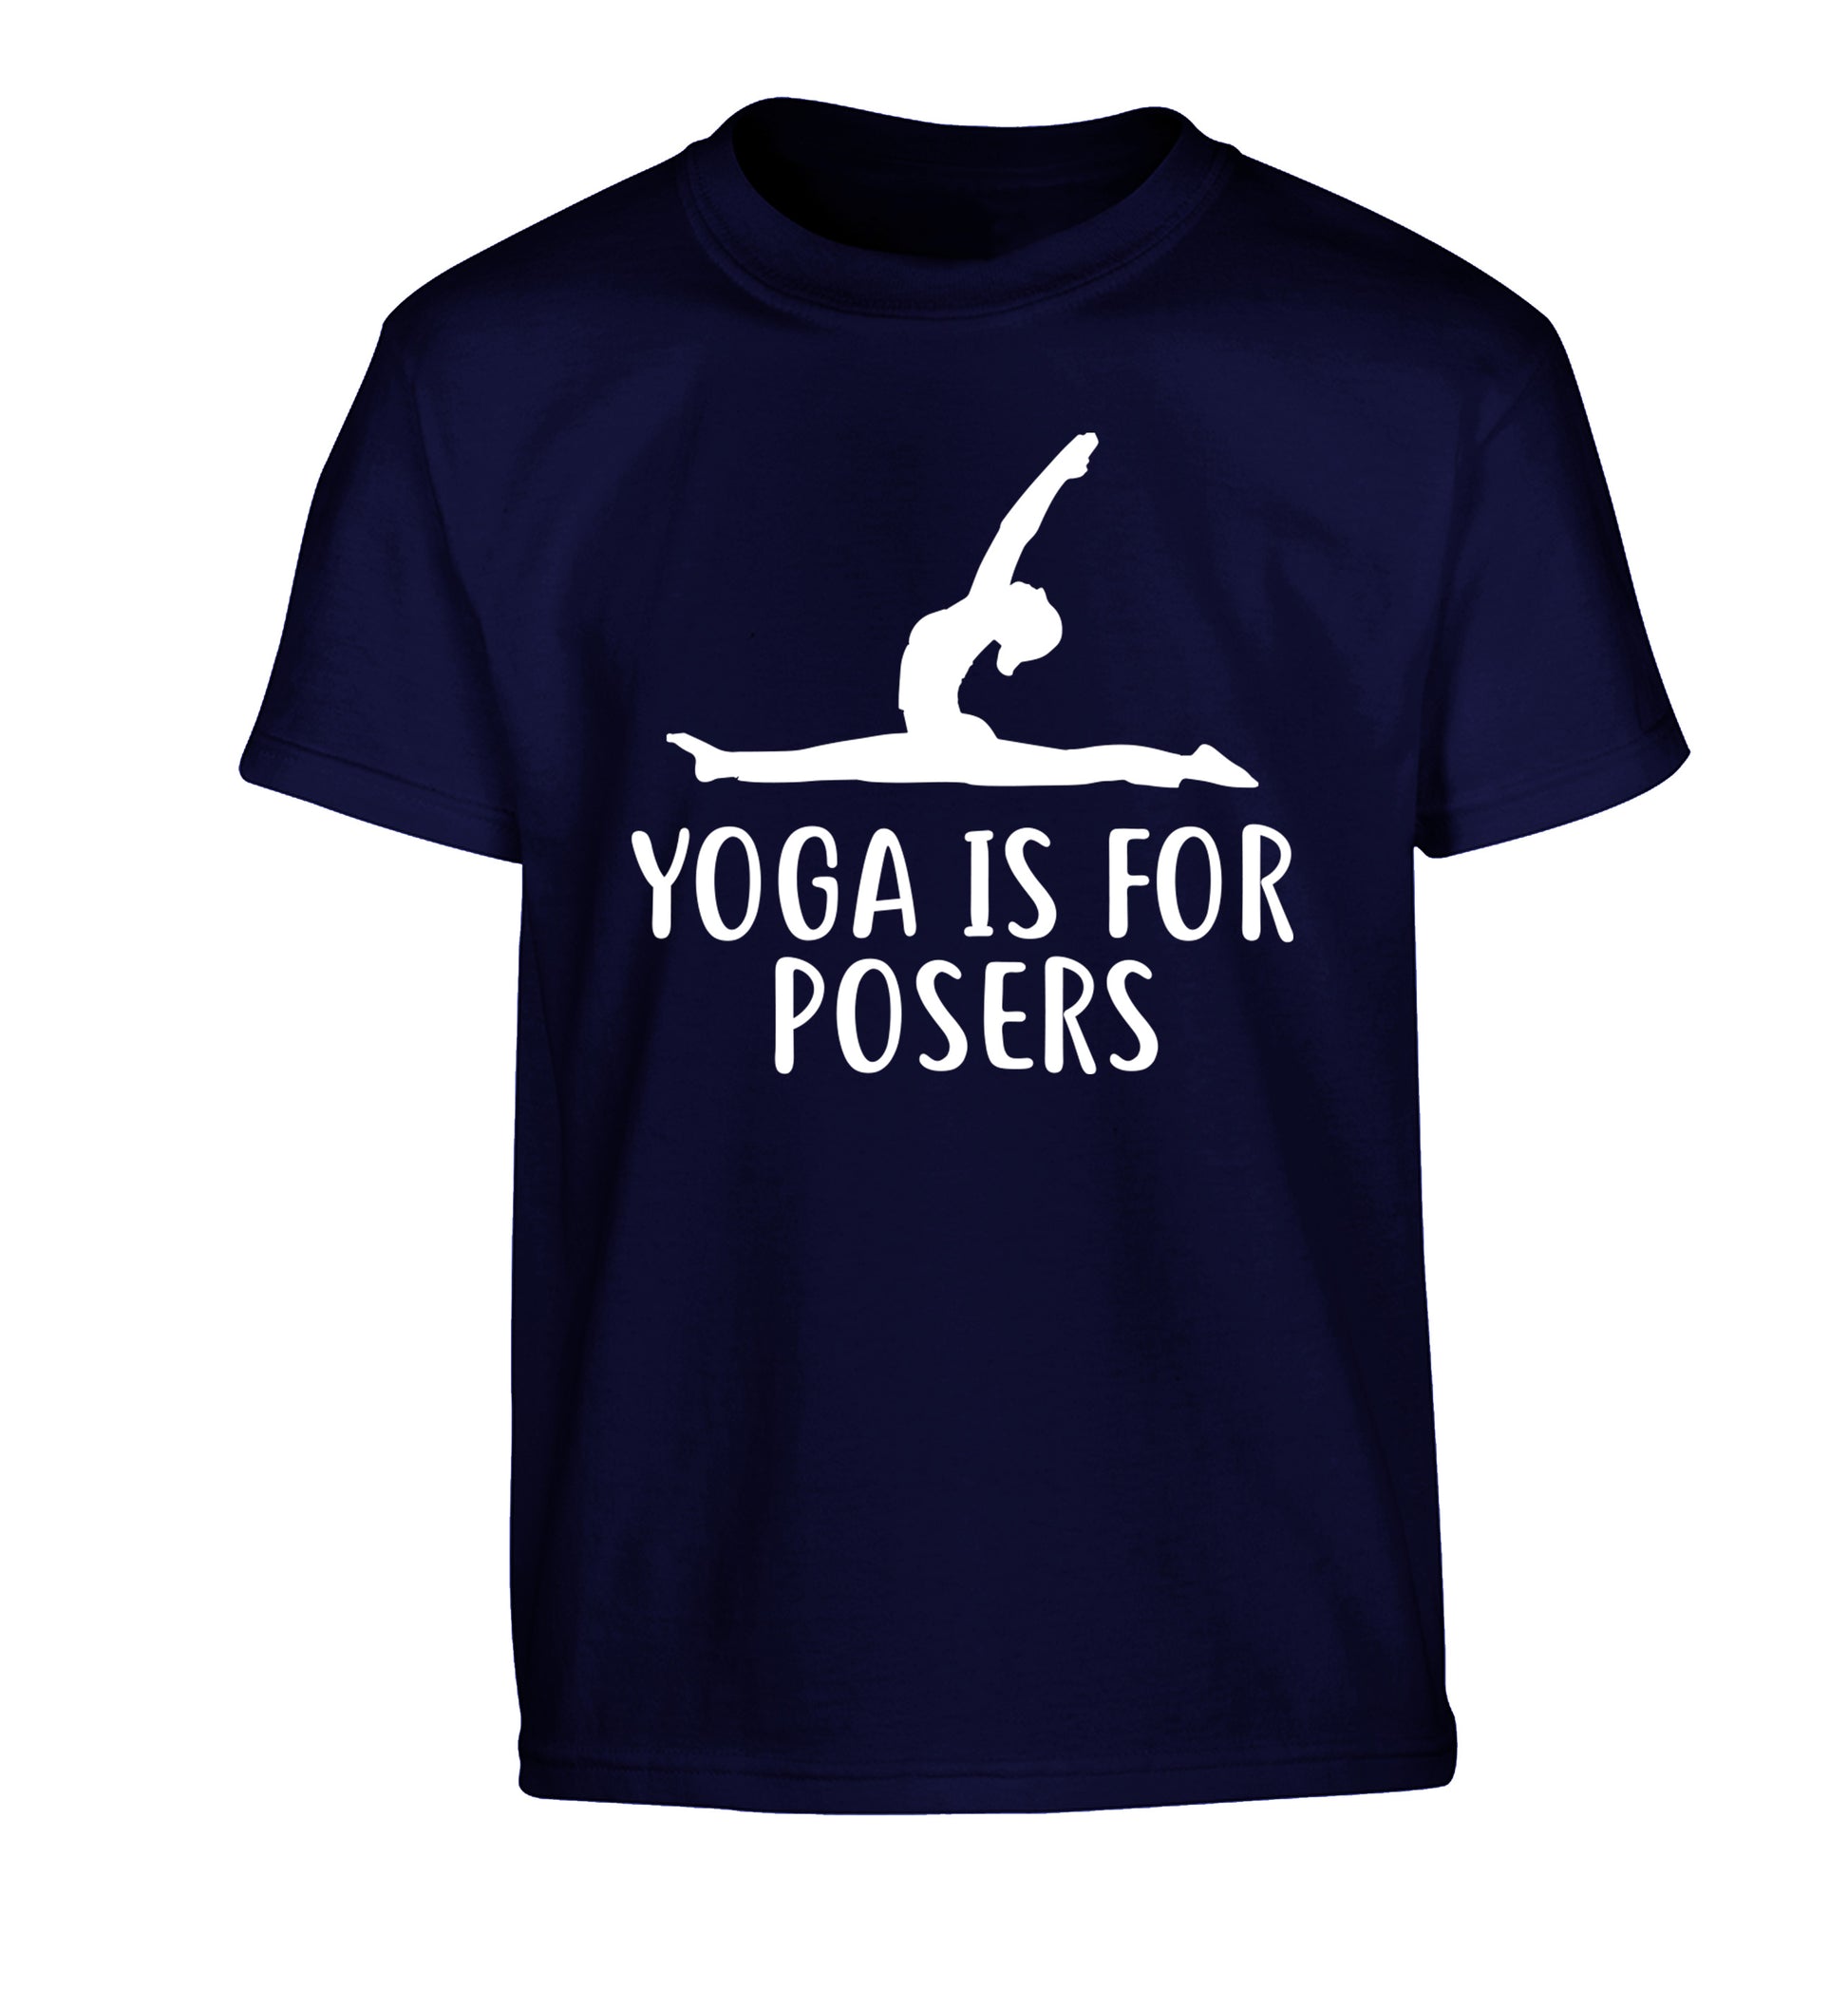 Yoga is for posers Children's navy Tshirt 12-13 Years